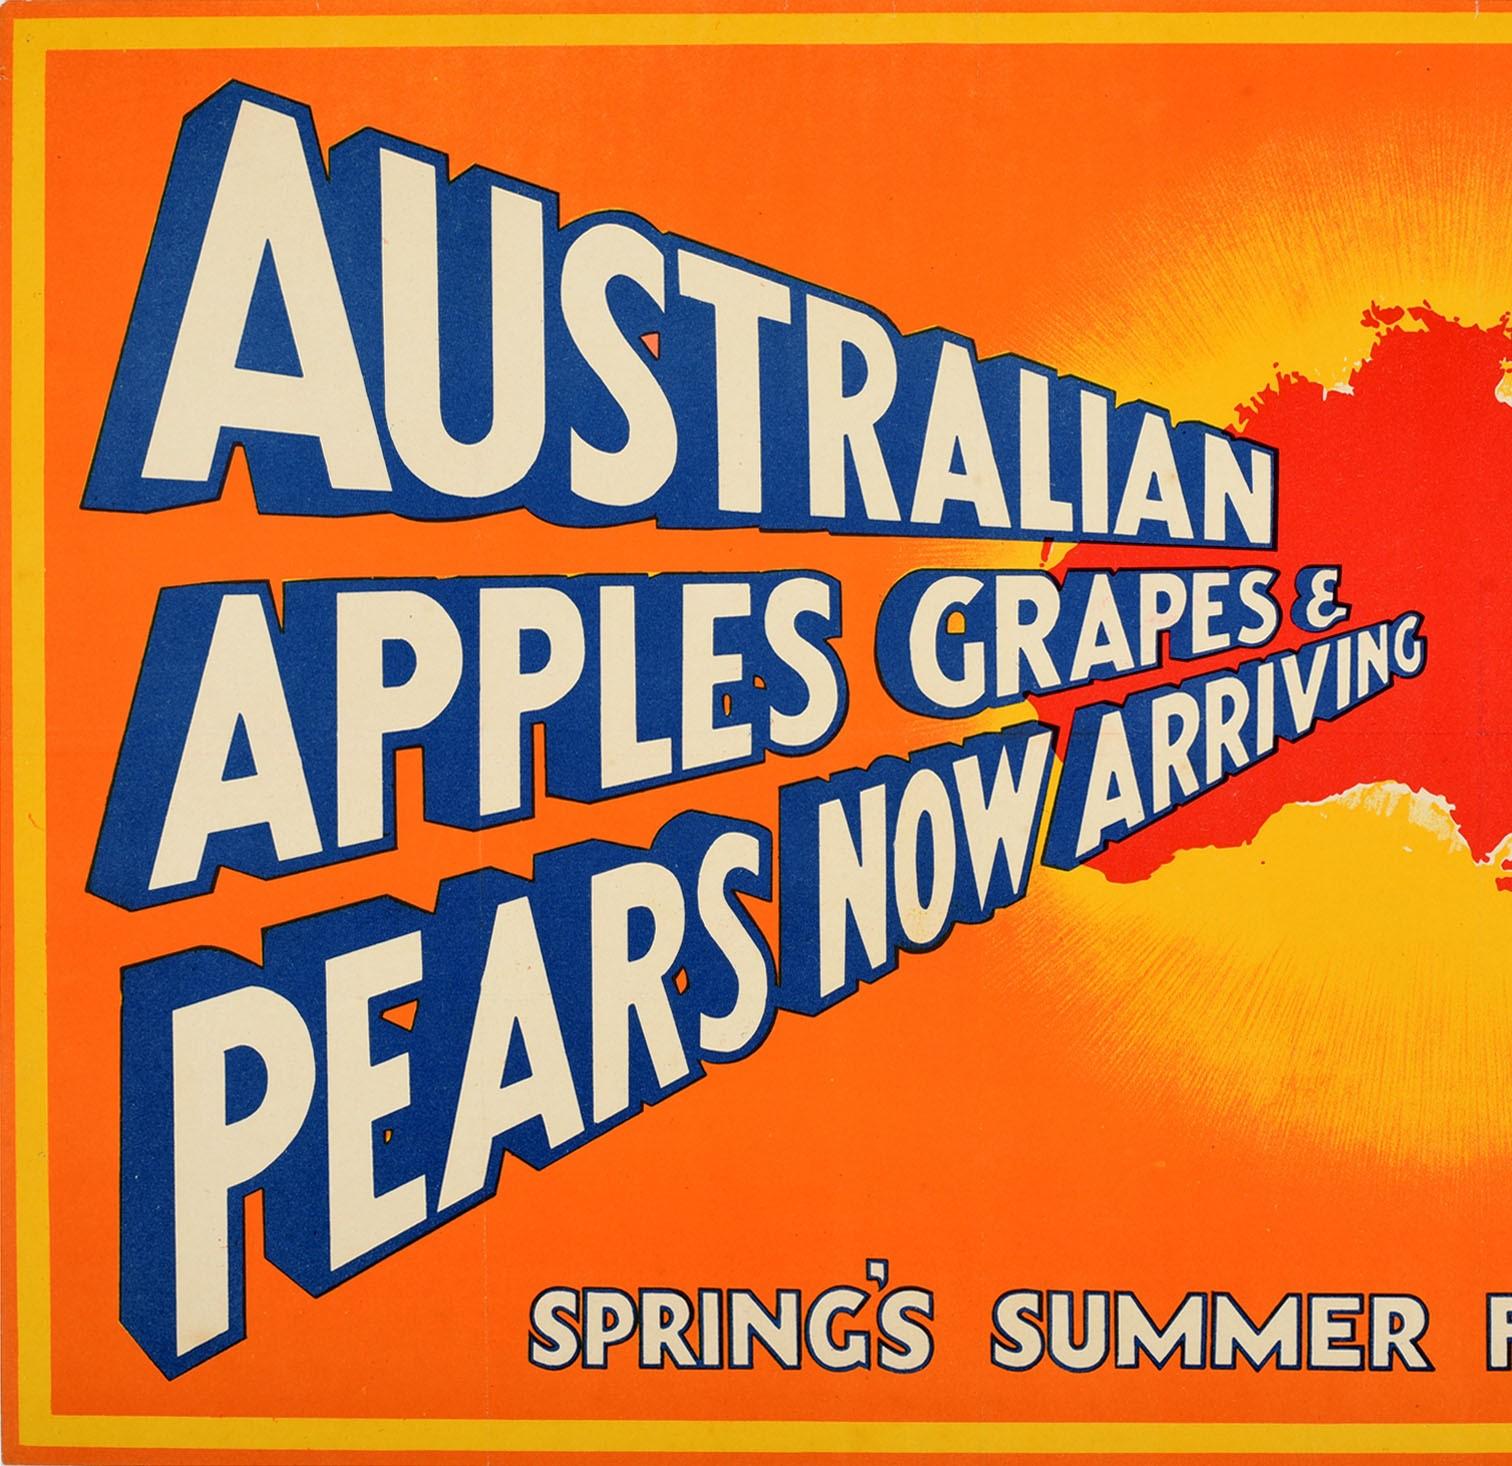 Original vintage food advertising poster - Australian Apples Grapes and Pears Now arriving Spring's Summer Fruits - featuring a dynamic design depicting the bold blue and white lettering coming from a highlighted map of Australia promoting the